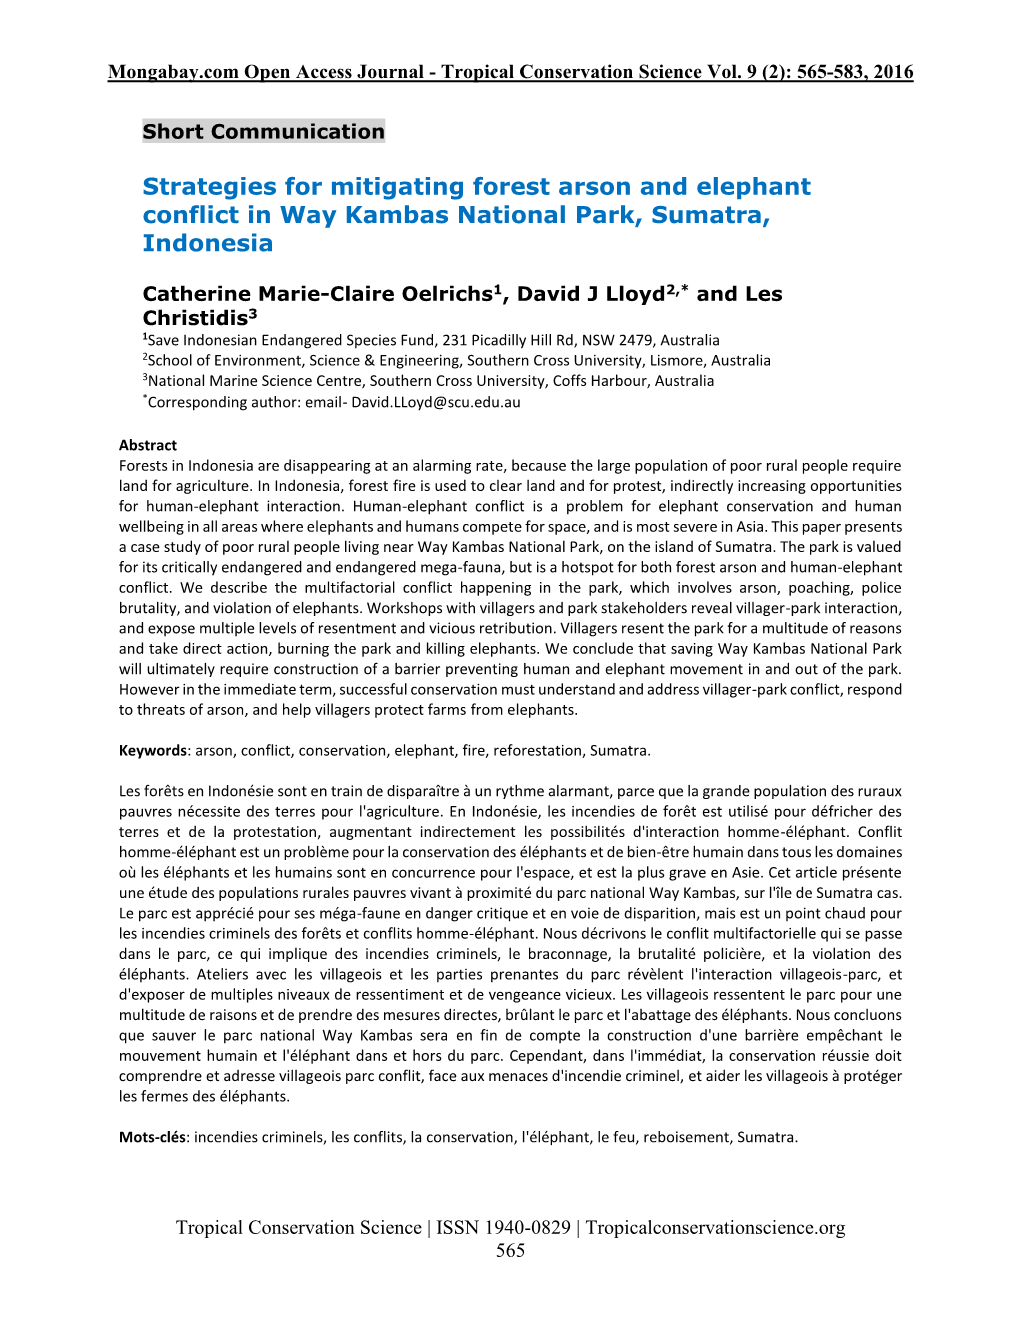 Strategies for Mitigating Forest Arson and Elephant Conflict in Way Kambas National Park, Sumatra, Indonesia